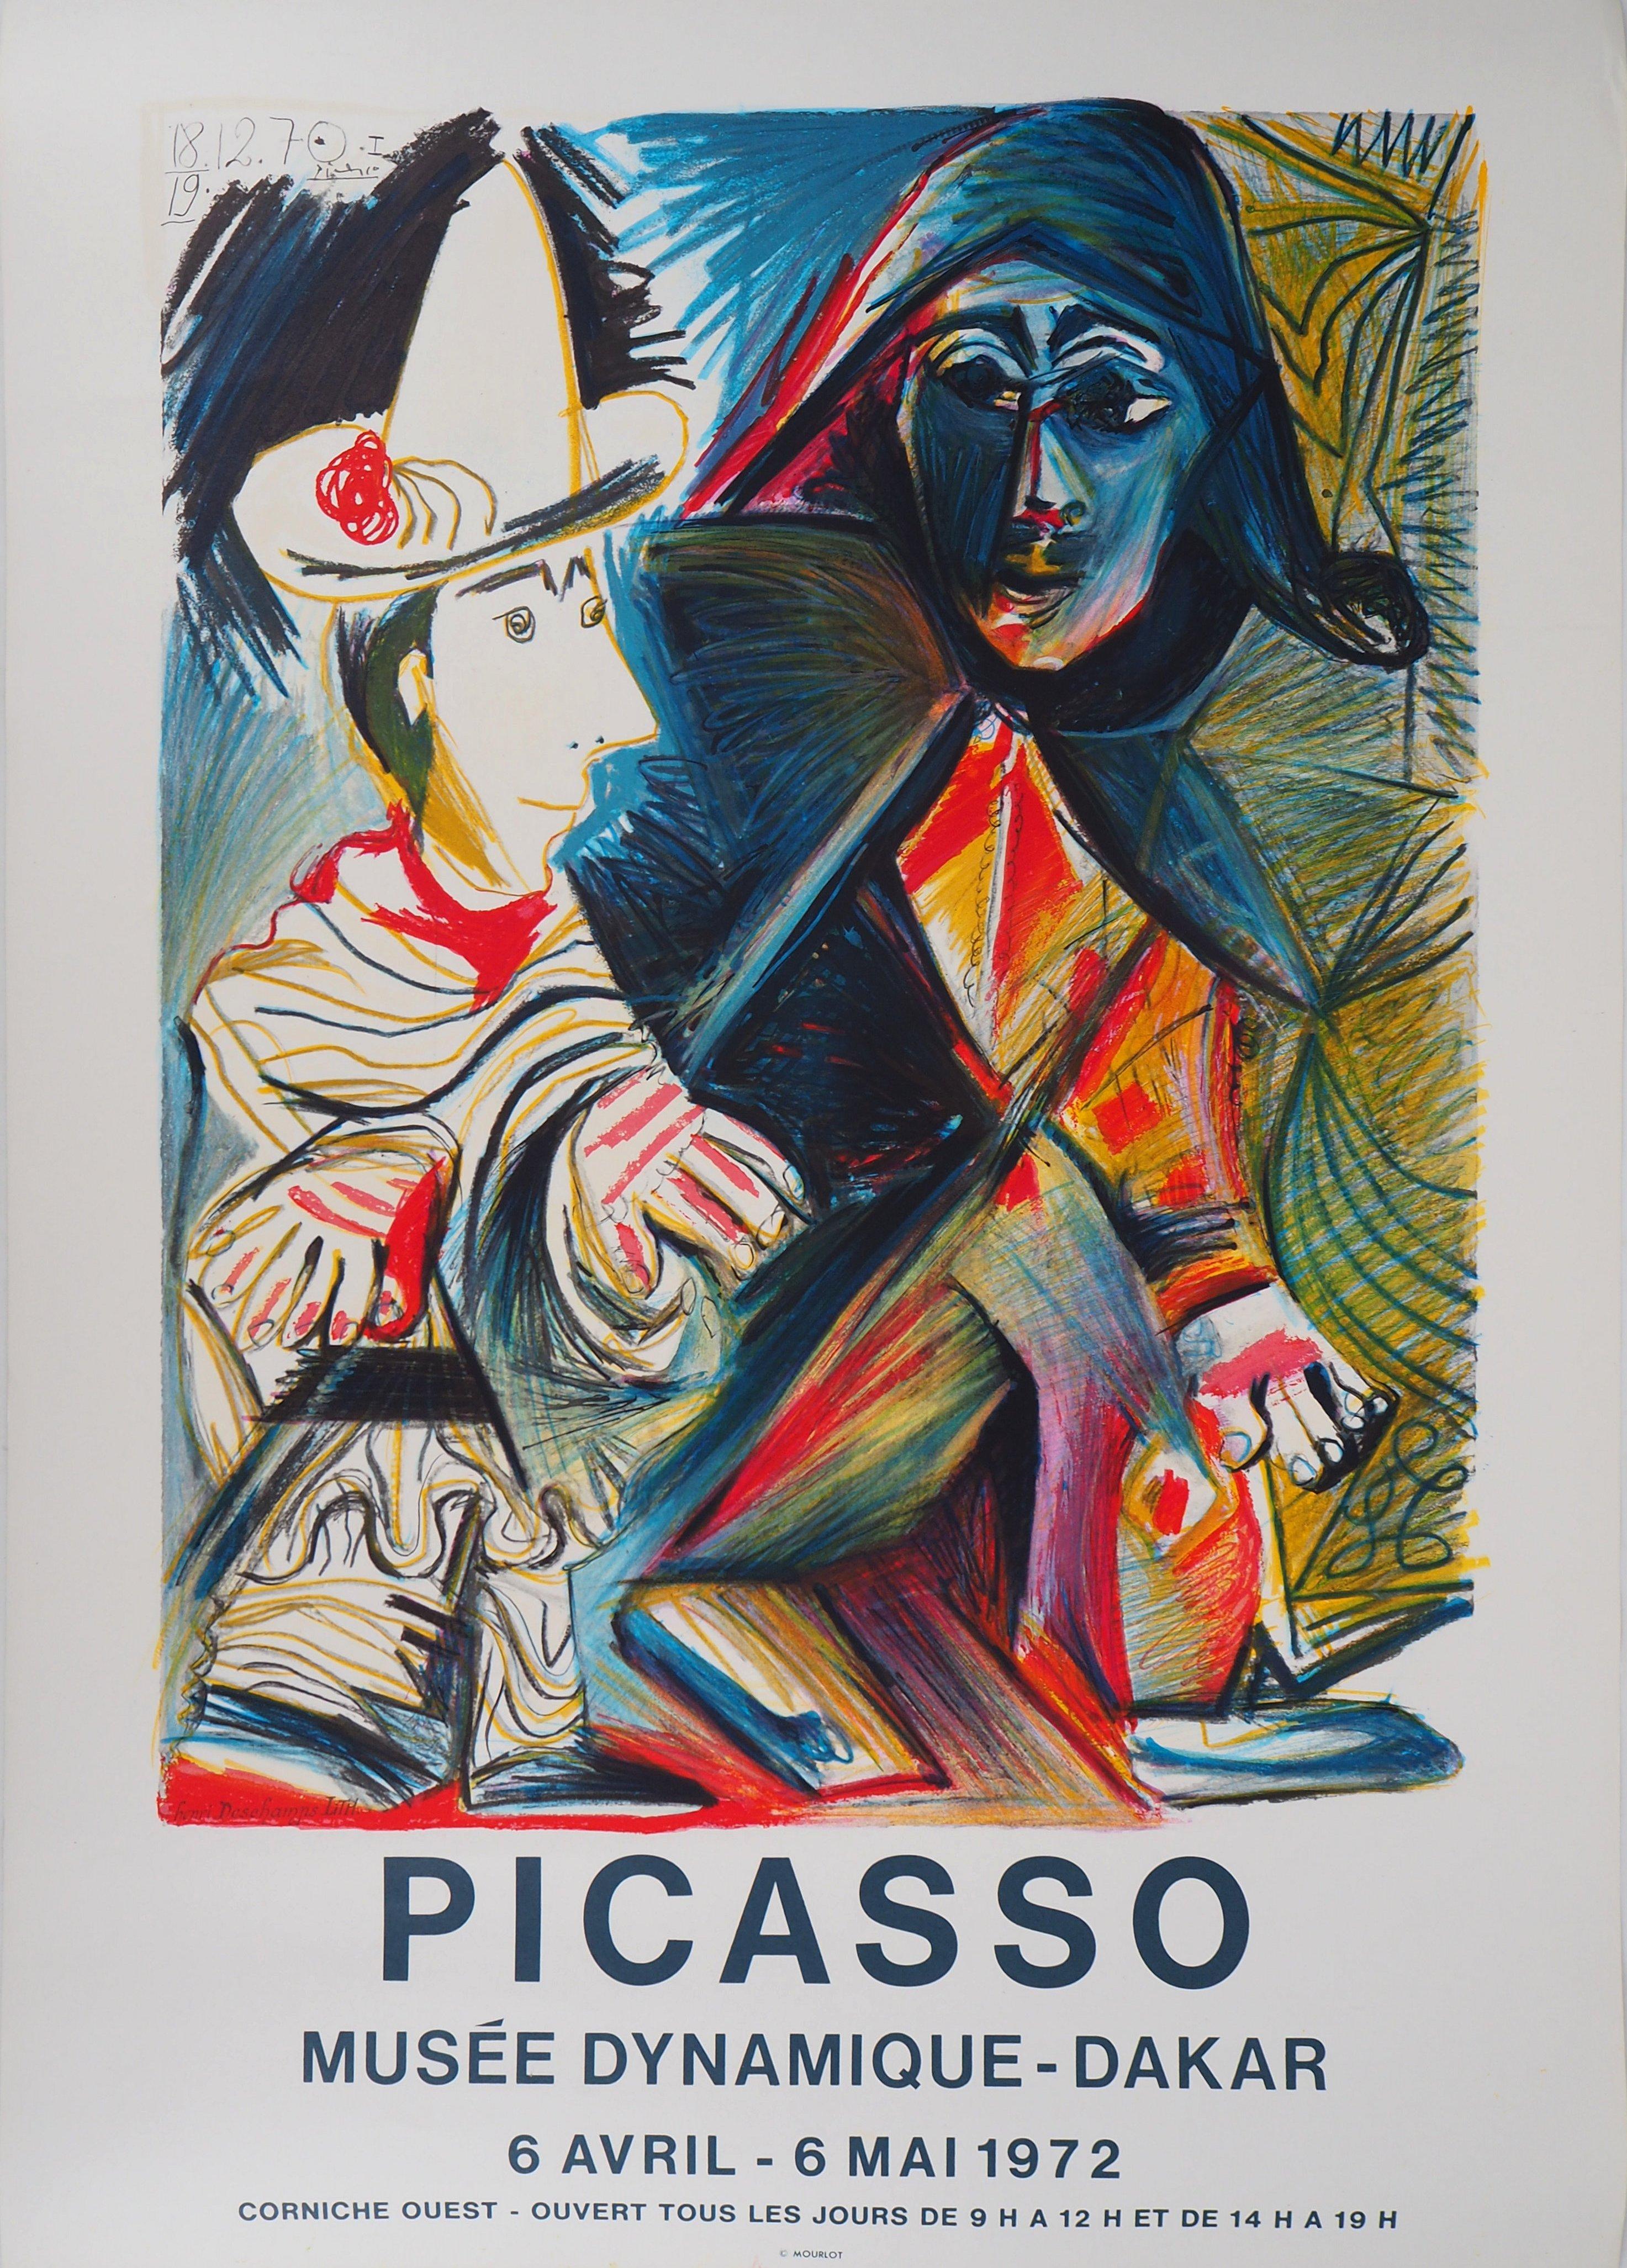 (after) Pablo Picasso Figurative Print - Pierrot and Harlequin - Lithograph (Mourlot, 1972)